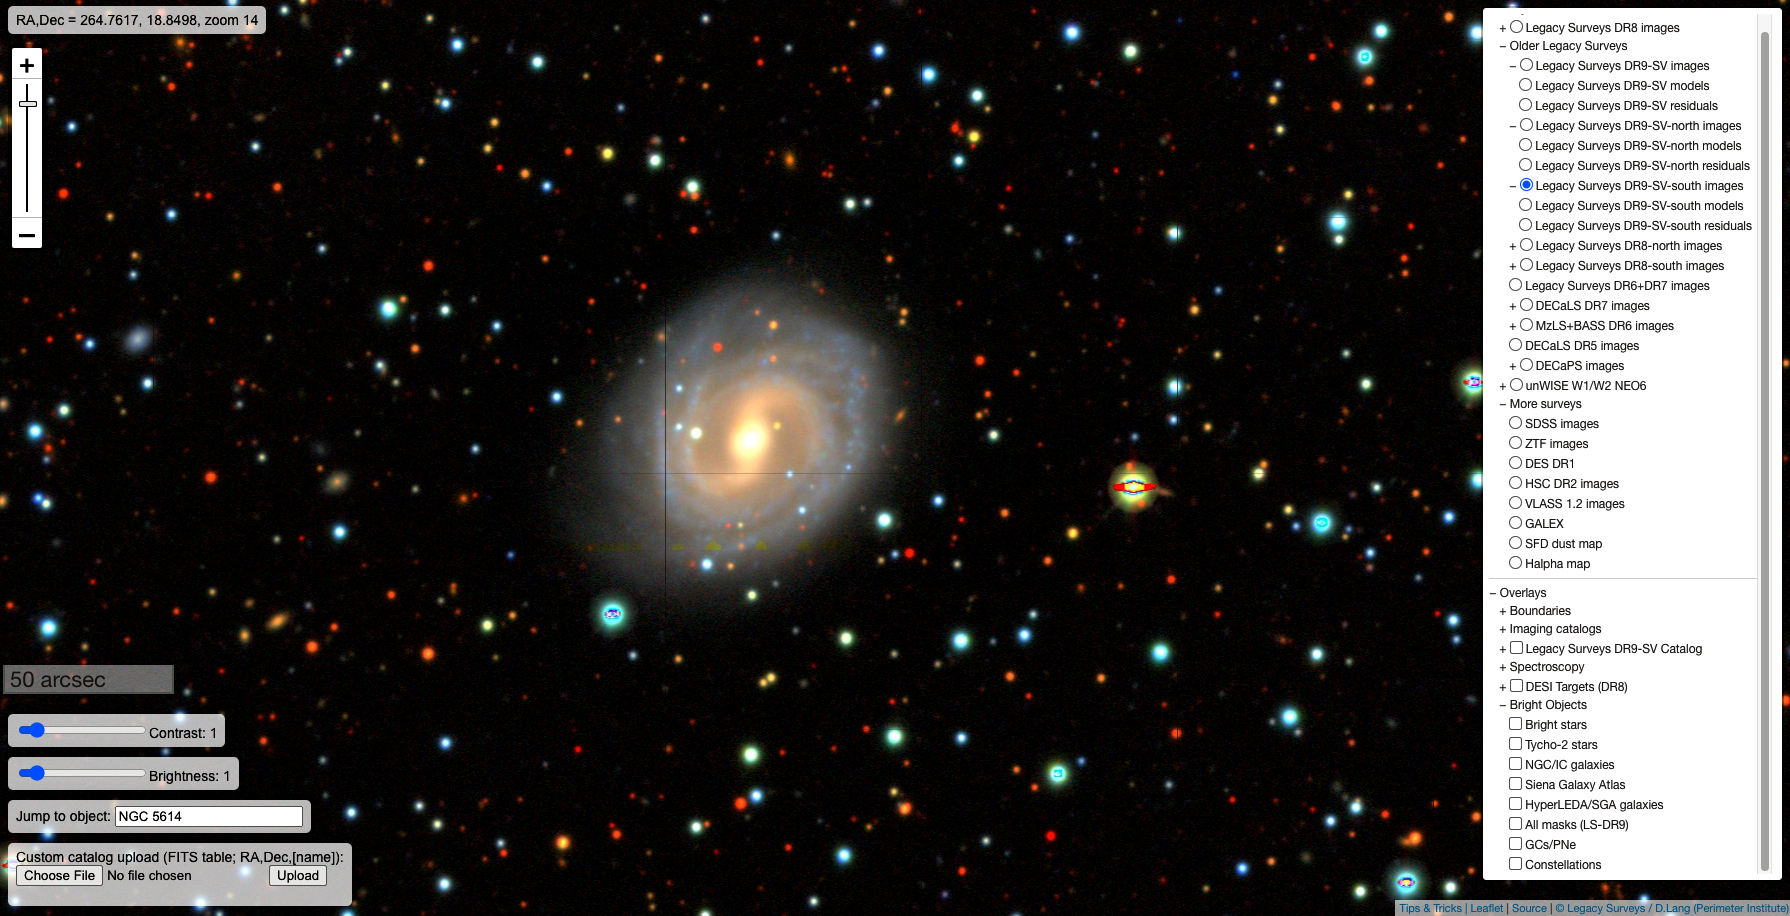 Screenshot - A spiral galaxy, viewed with the Sky Viewer tool. (Credit: DESI Legacy Imaging Surveys)